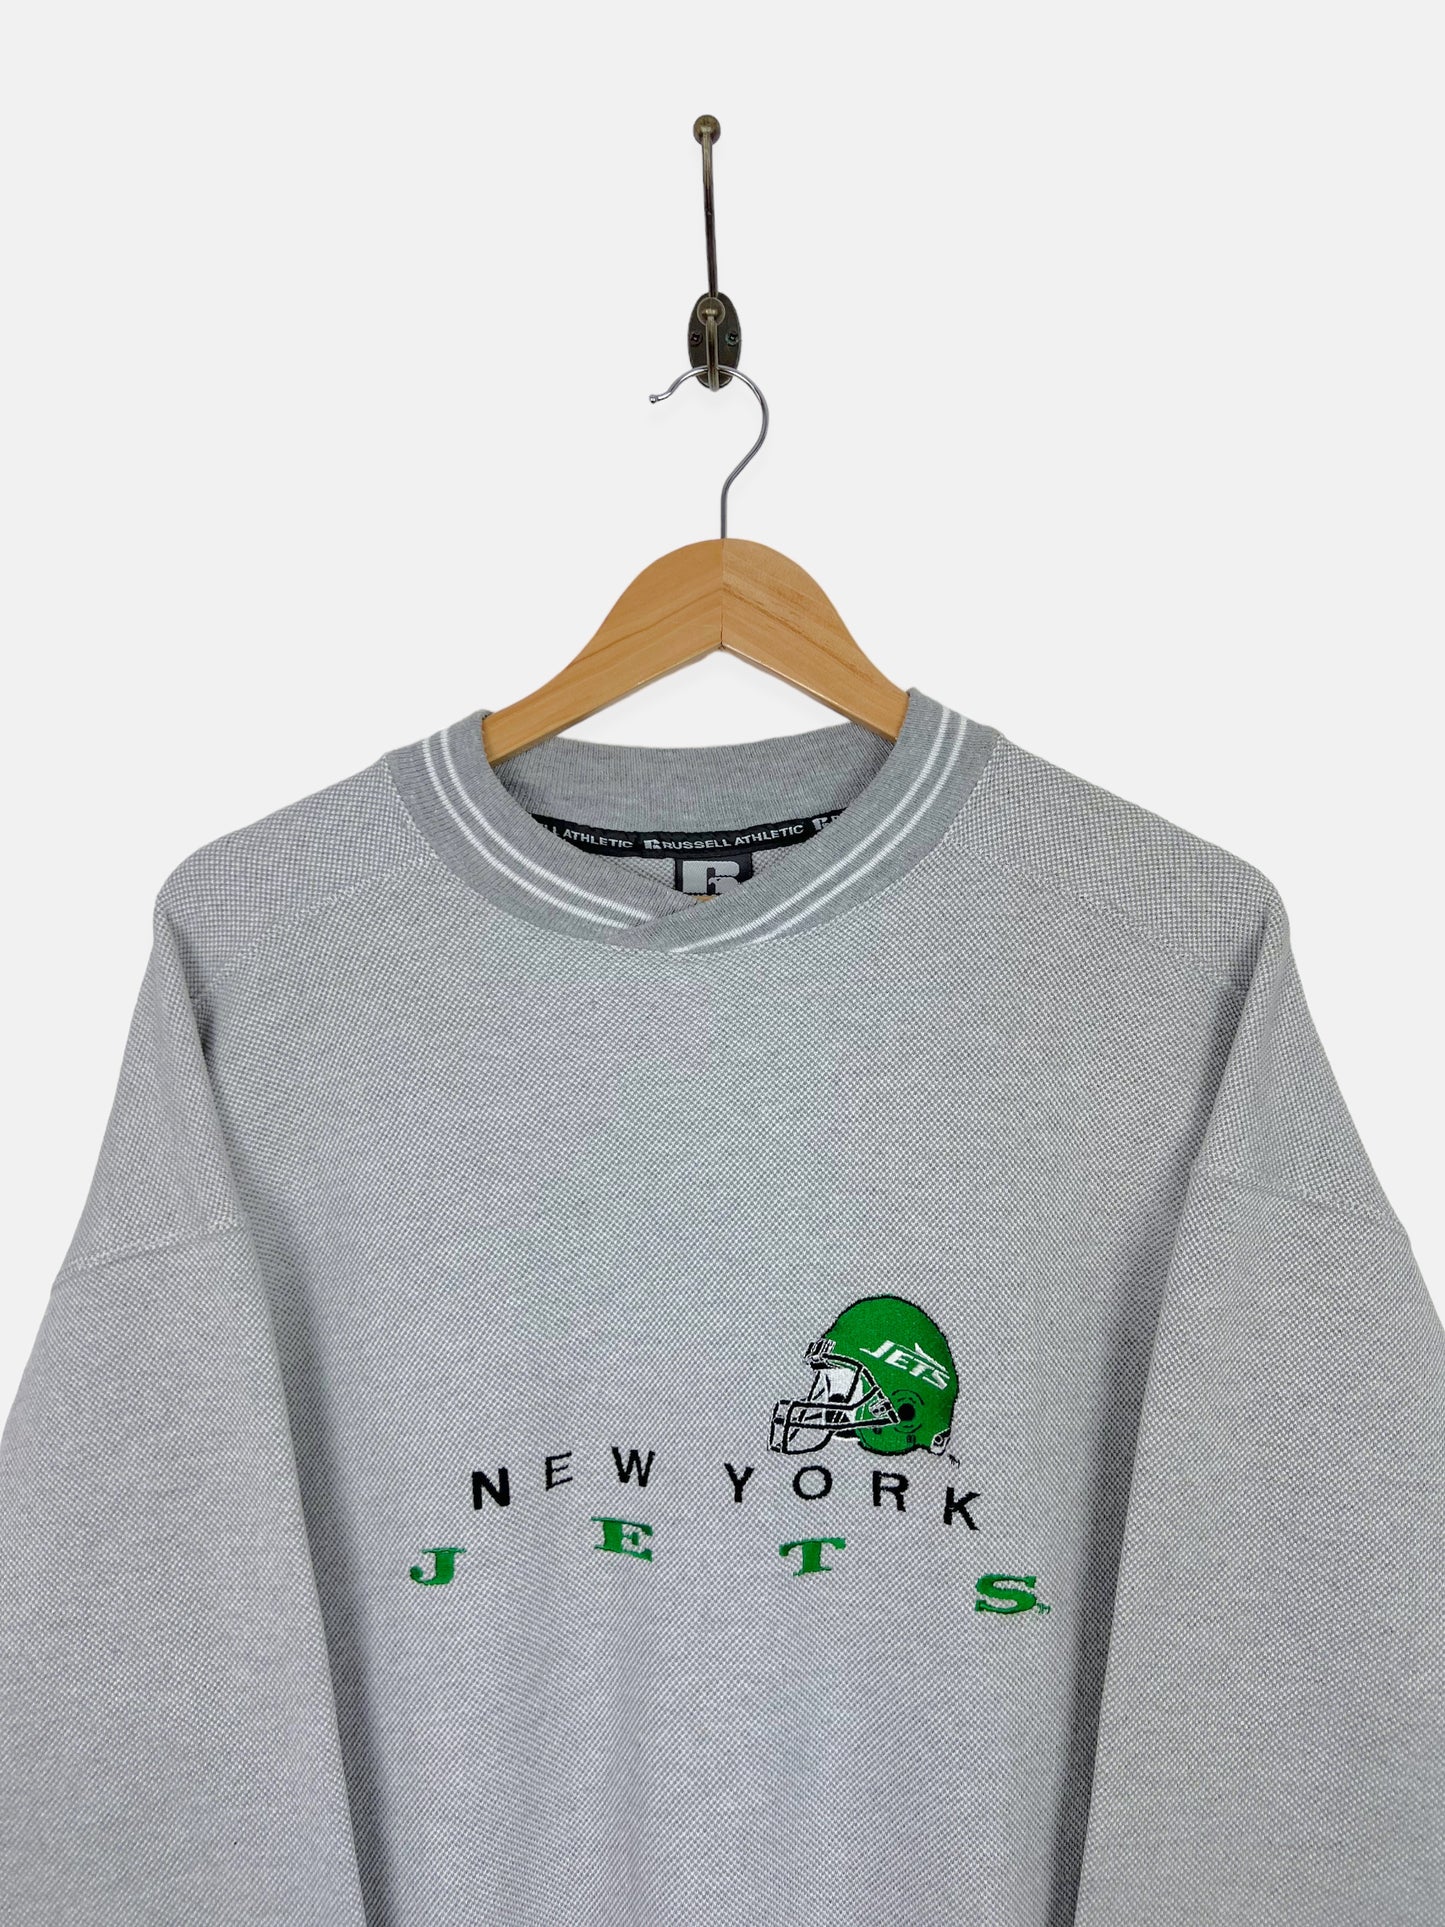 90's New York Jets NFL USA Made Embroidered Vintage Sweatshirt Size L-XL